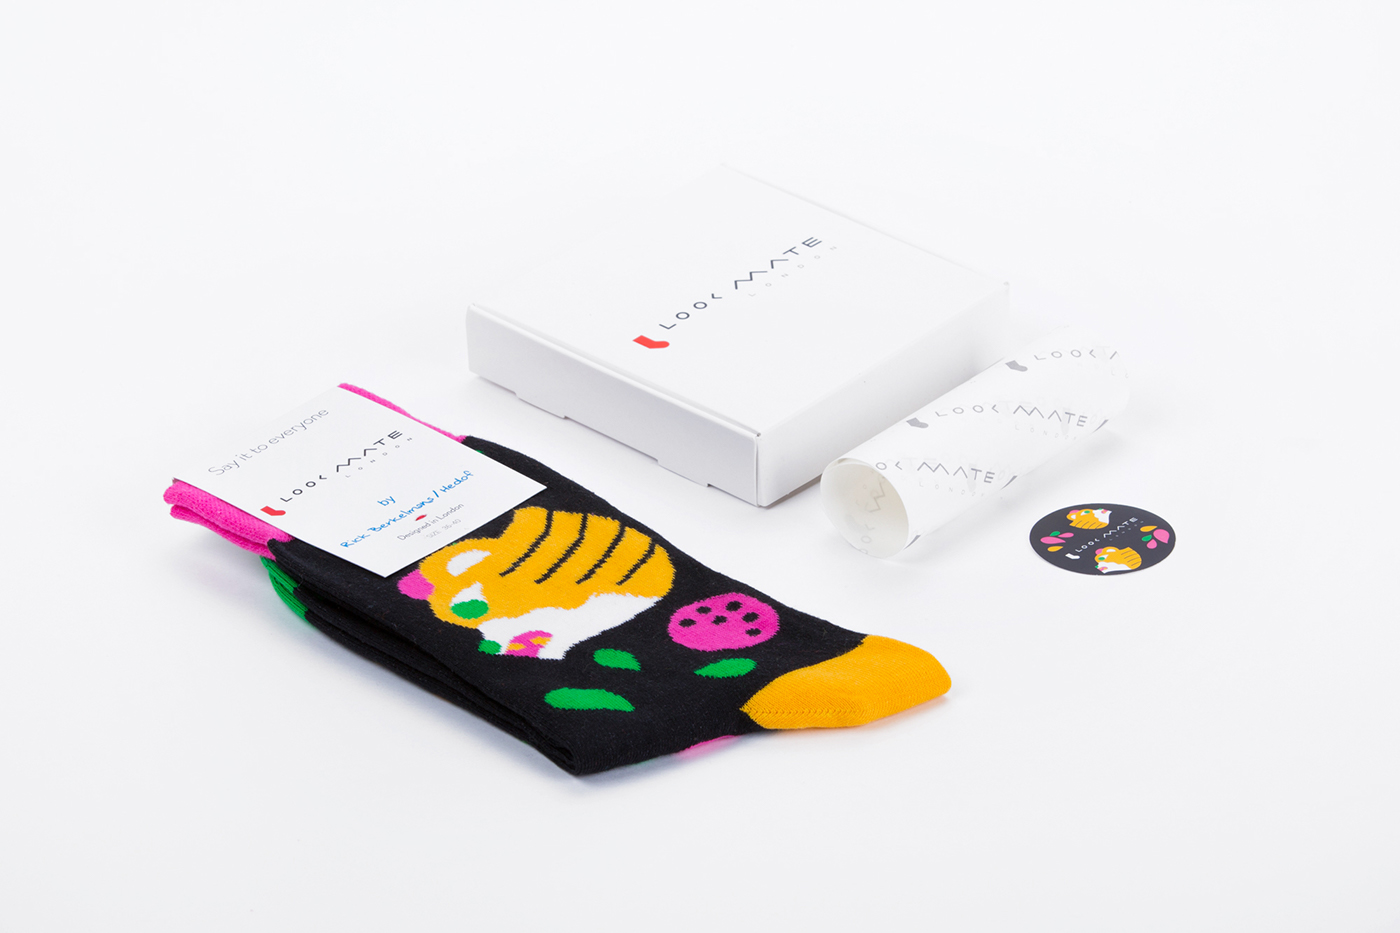 socks lookmate lifestyle graphicdesign Packaging creative design Fashion  mensfashion